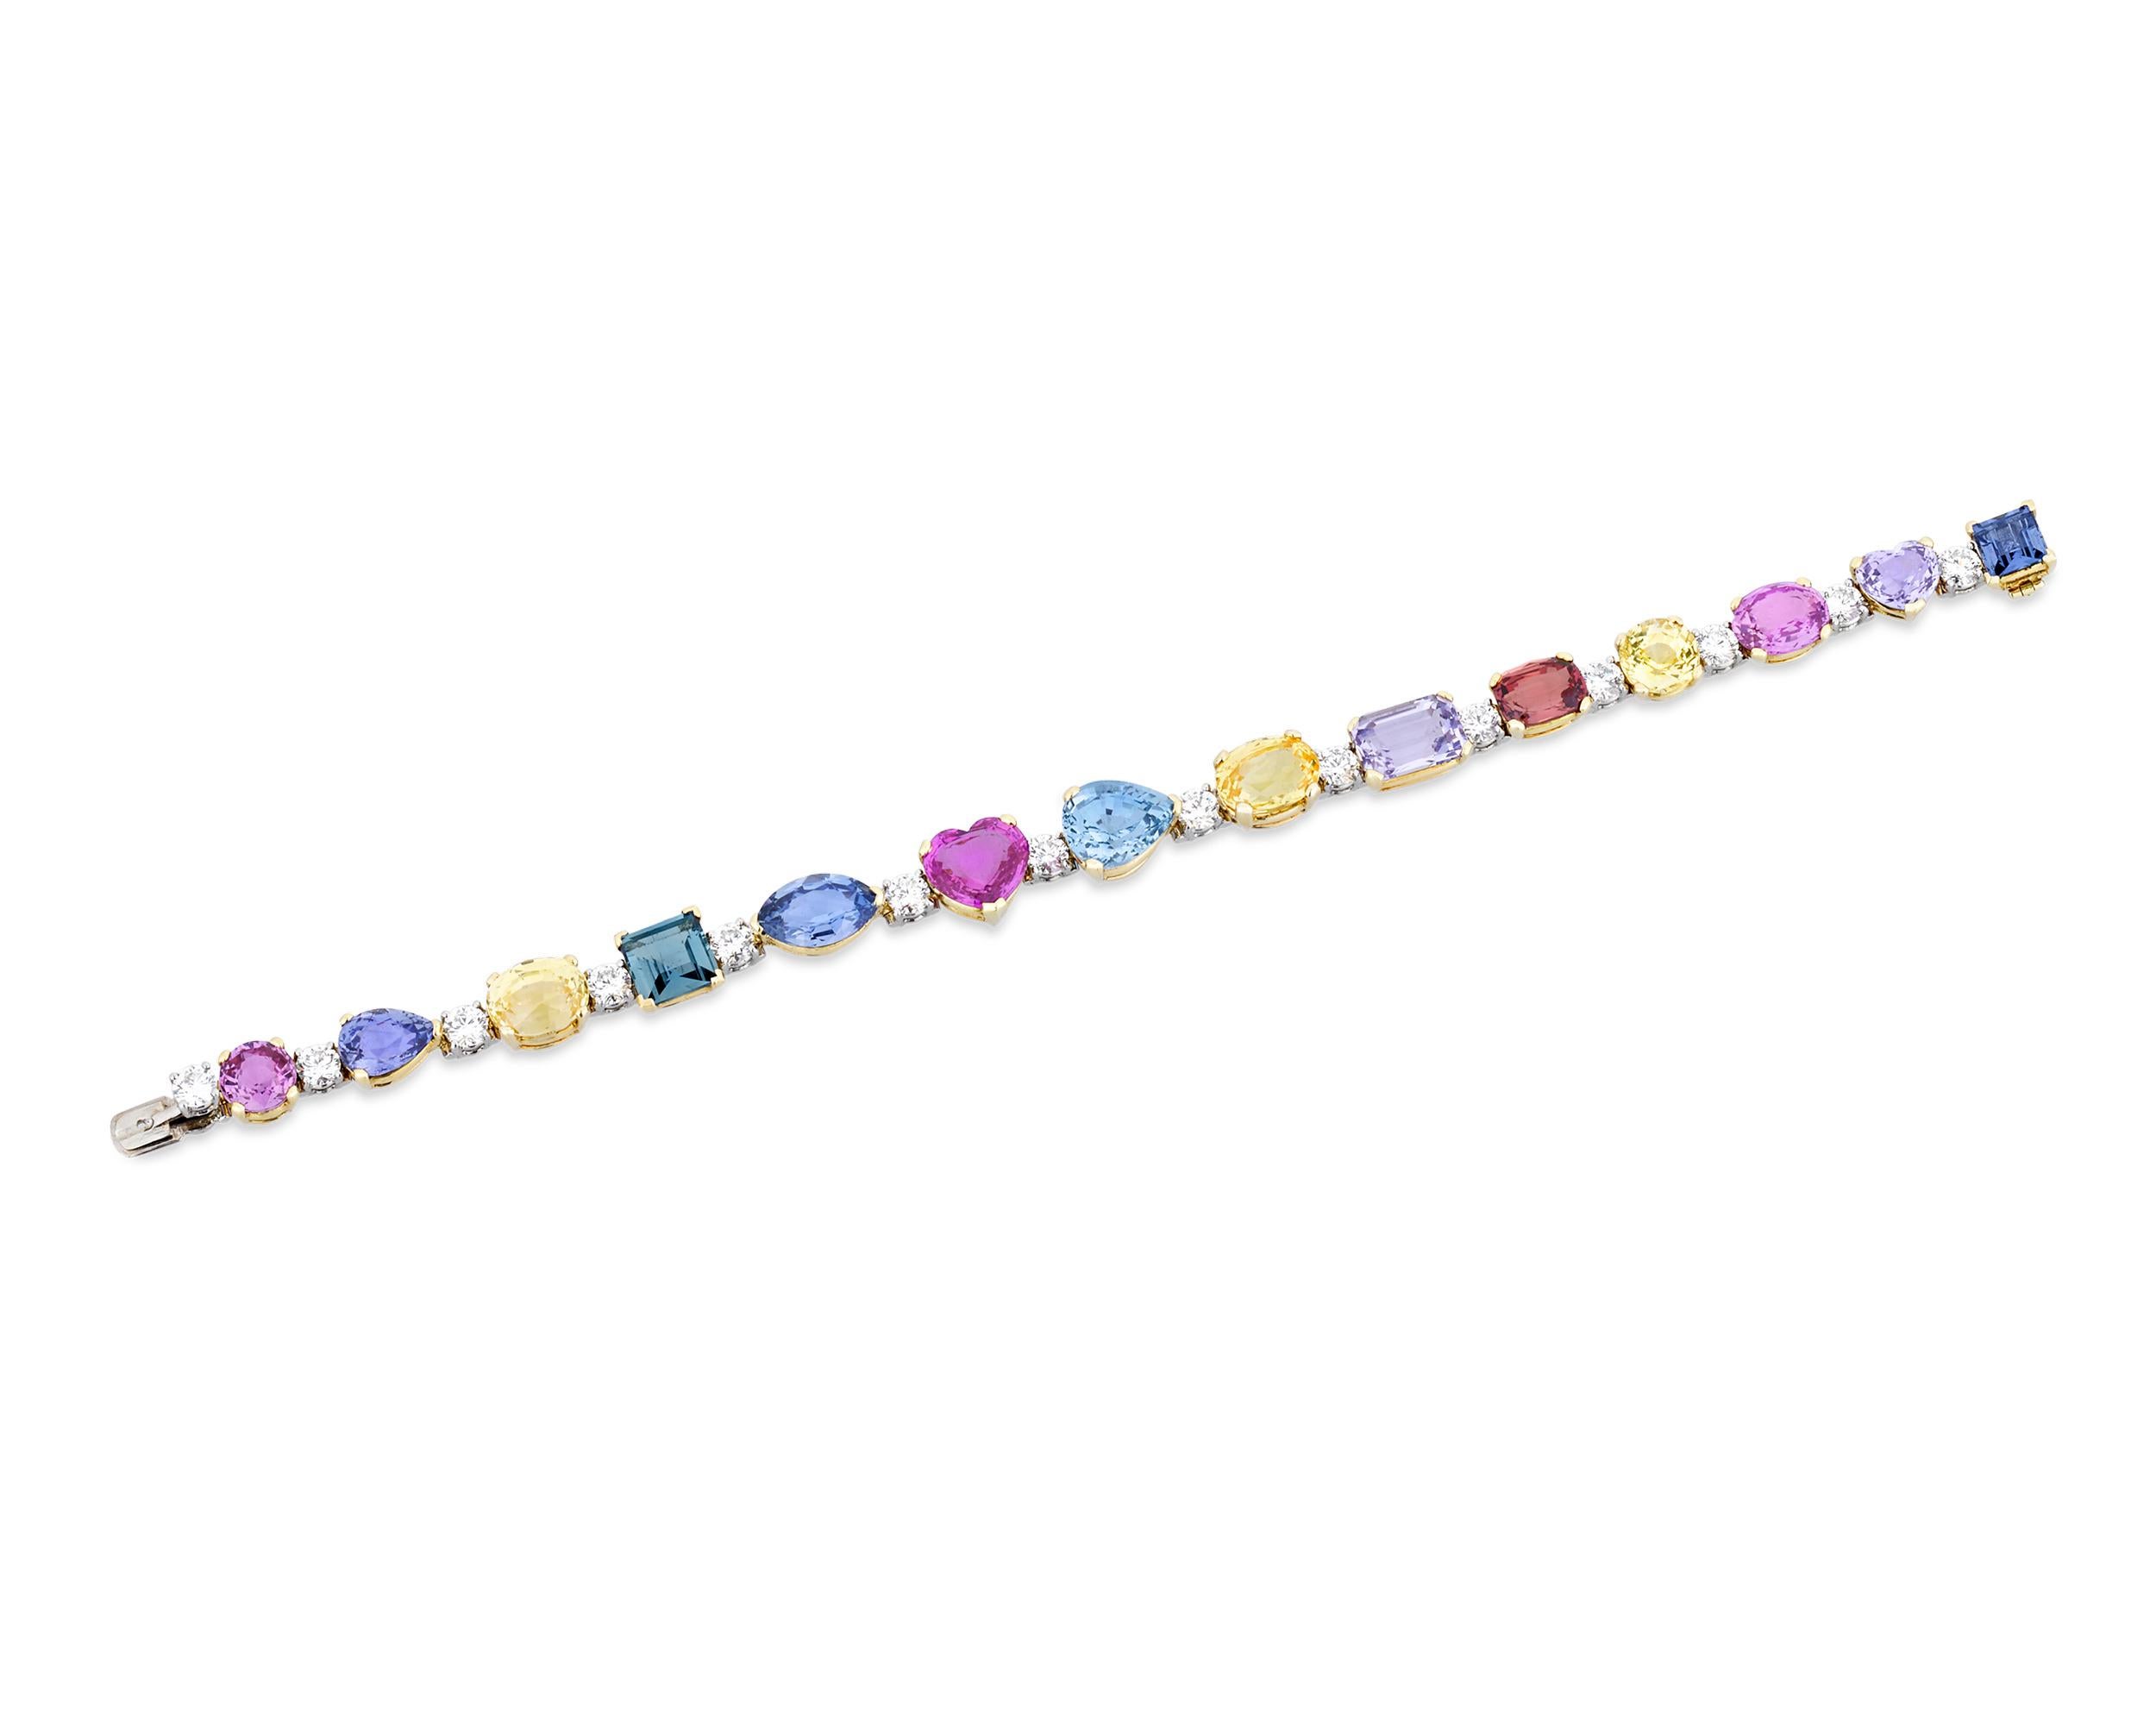 A remarkable spectrum of color is showcased in this eye-catching sapphire and diamond bracelet crafted by the legendary Italian jeweler Bulgari. Rare multi-colored sapphires in diverse cuts totaling 47.30 carats sparkle in hues of canary yellow,